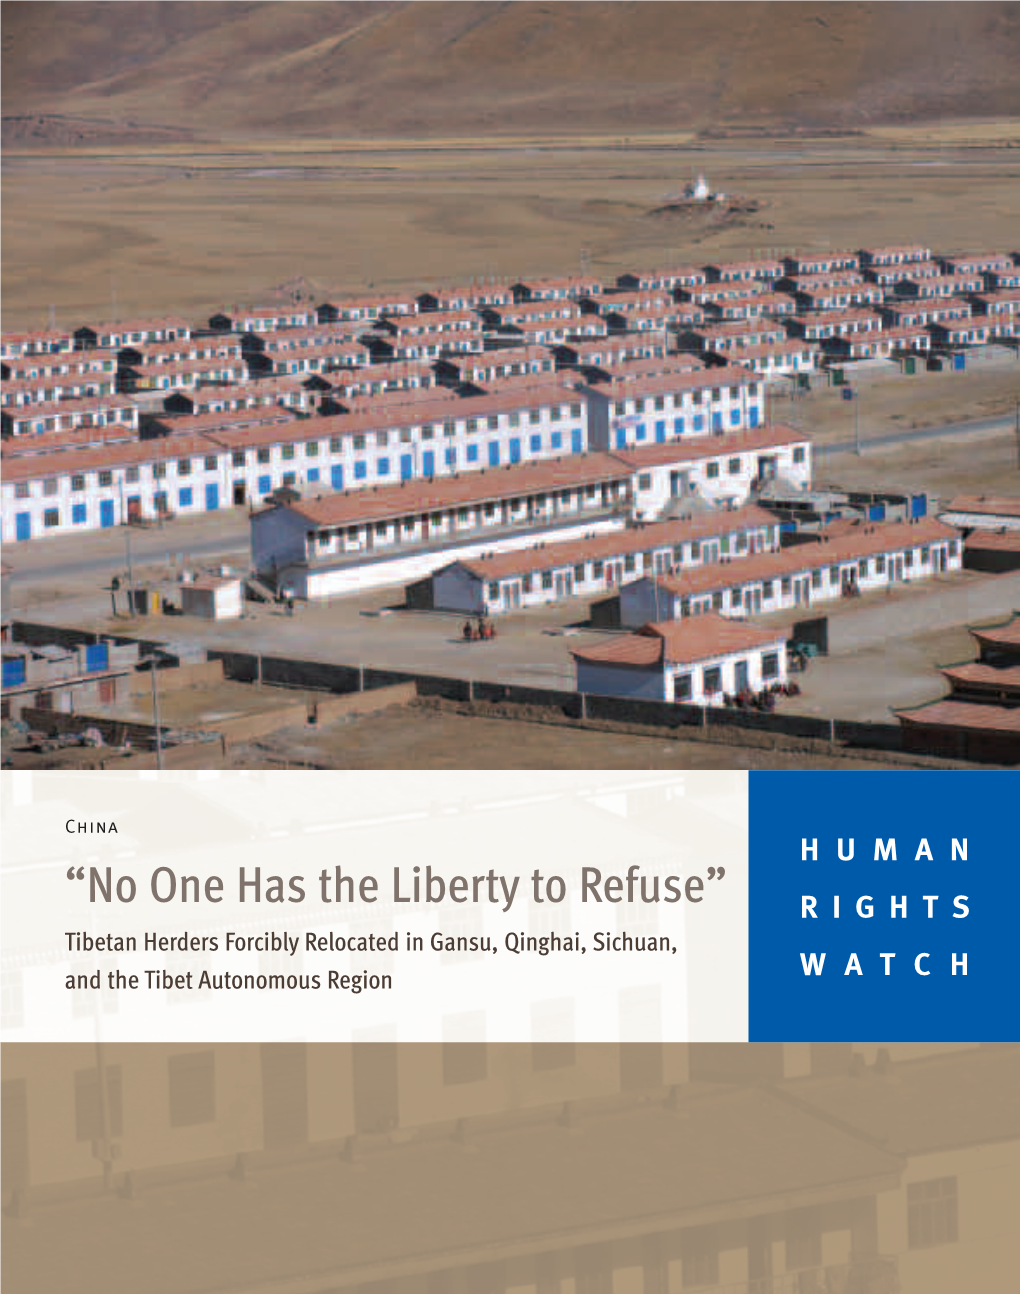 “No One Has the Liberty to Refuse” RIGHTS Tibetan Herders Forcibly Relocated in Gansu, Qinghai, Sichuan, and the Tibet Autonomous Region WATCH June 2007 Volume 19, No